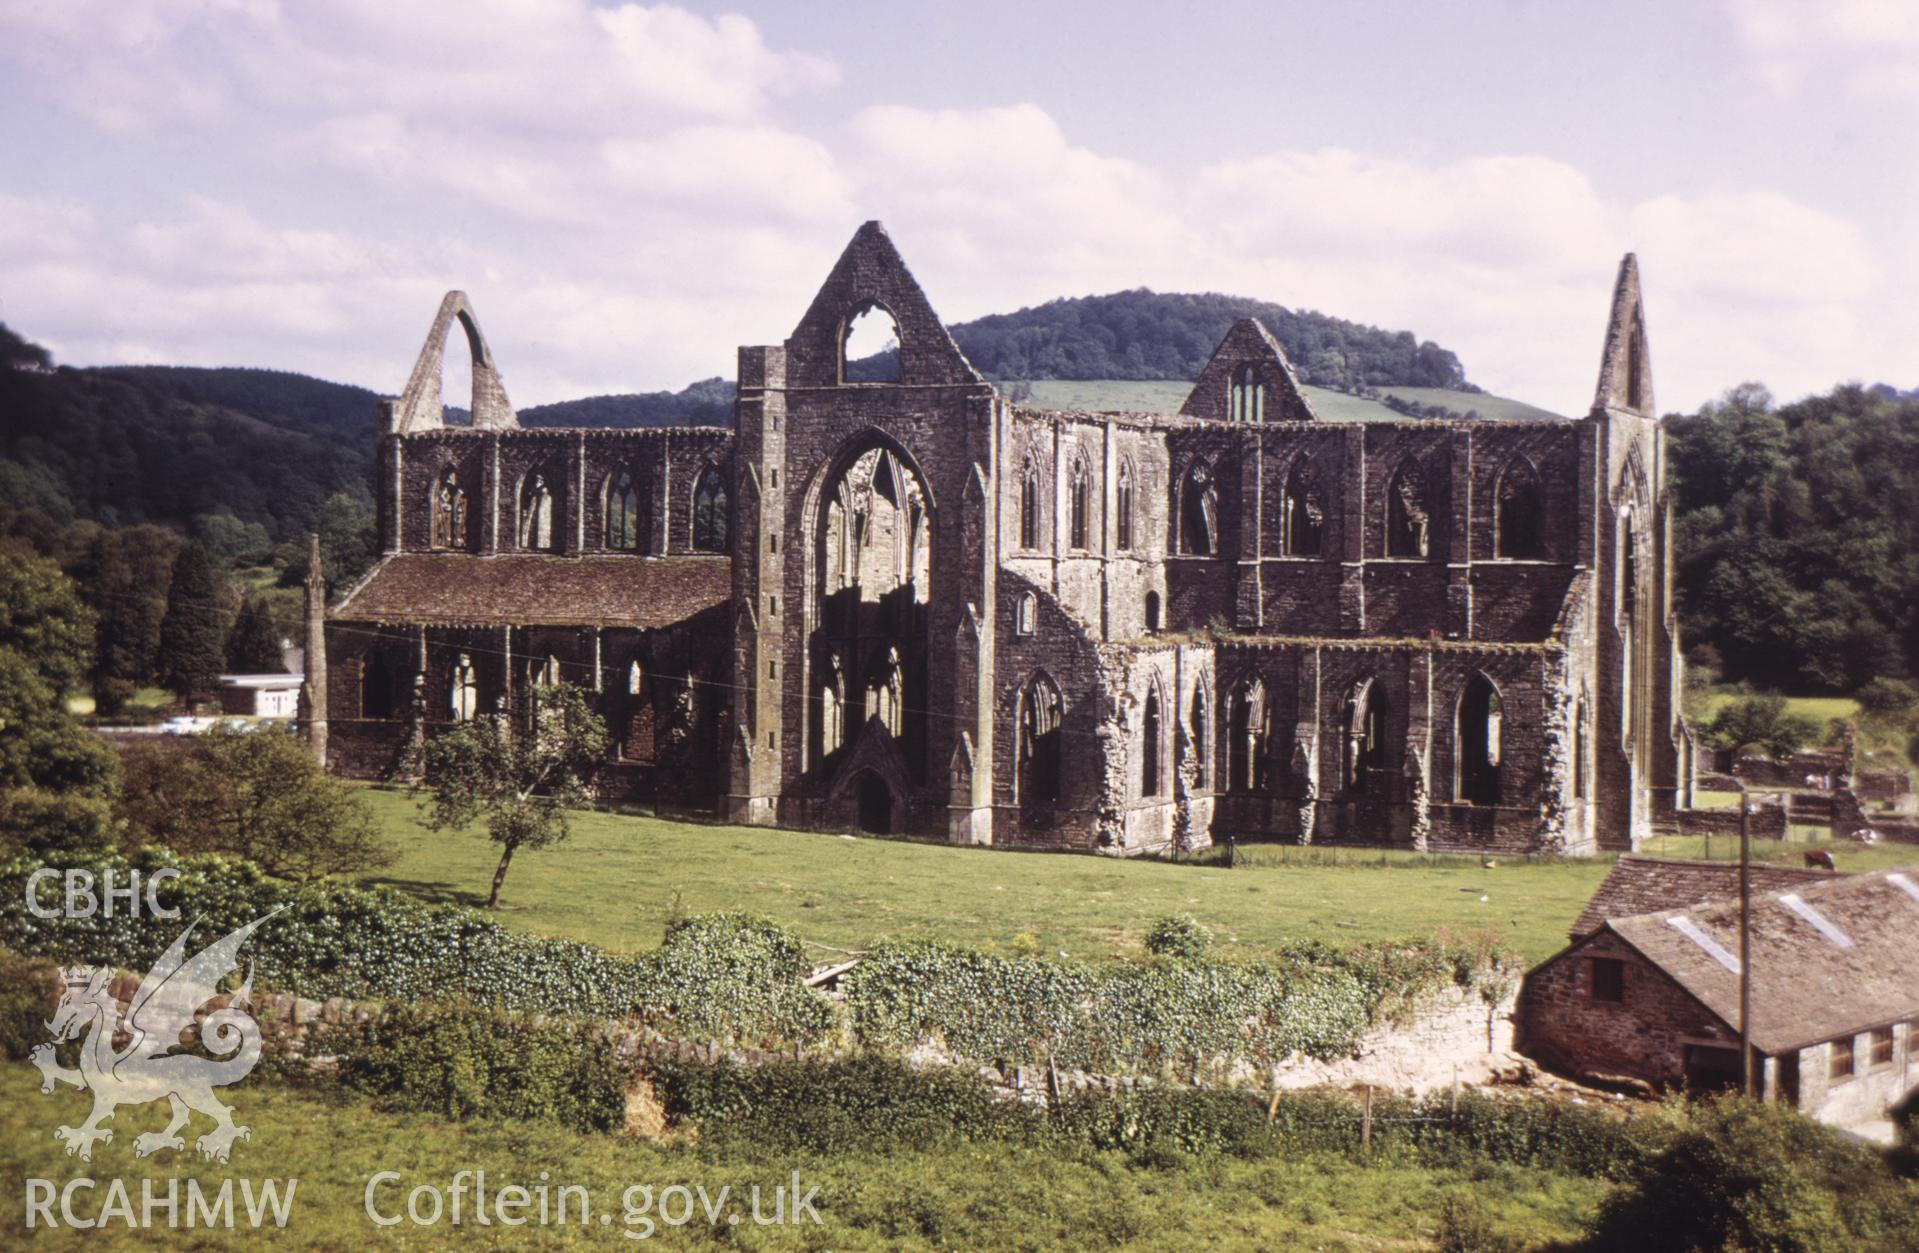 1 colour transparency showing view of Tintern Abbey, undated; collated by the former Central Office of Information.